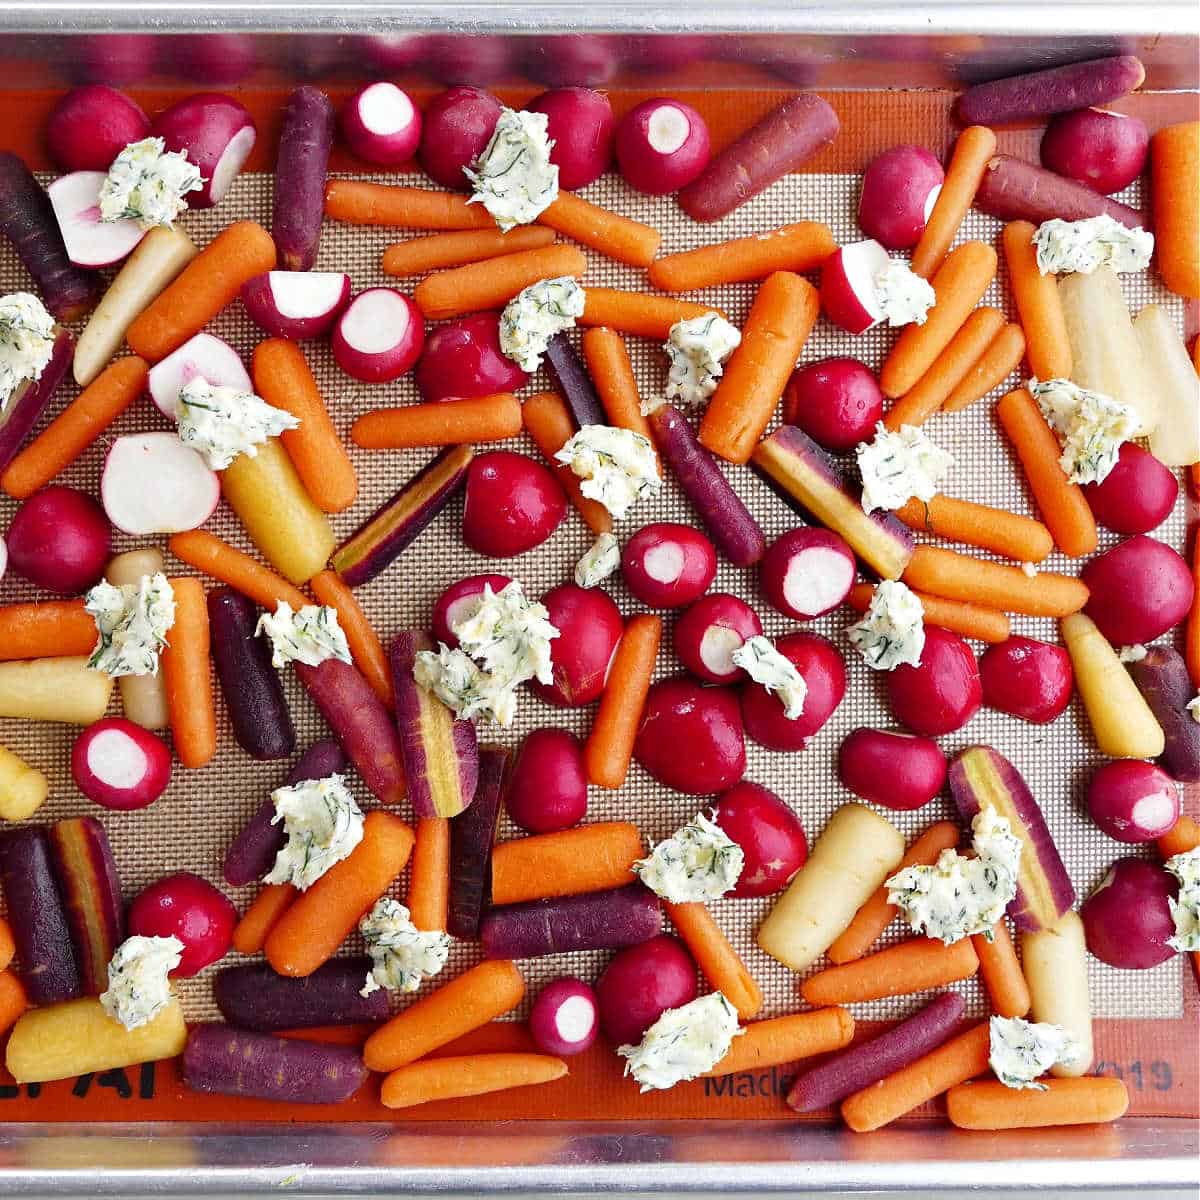 radishes and baby carrots on a baking sheet with dollops of compound butter